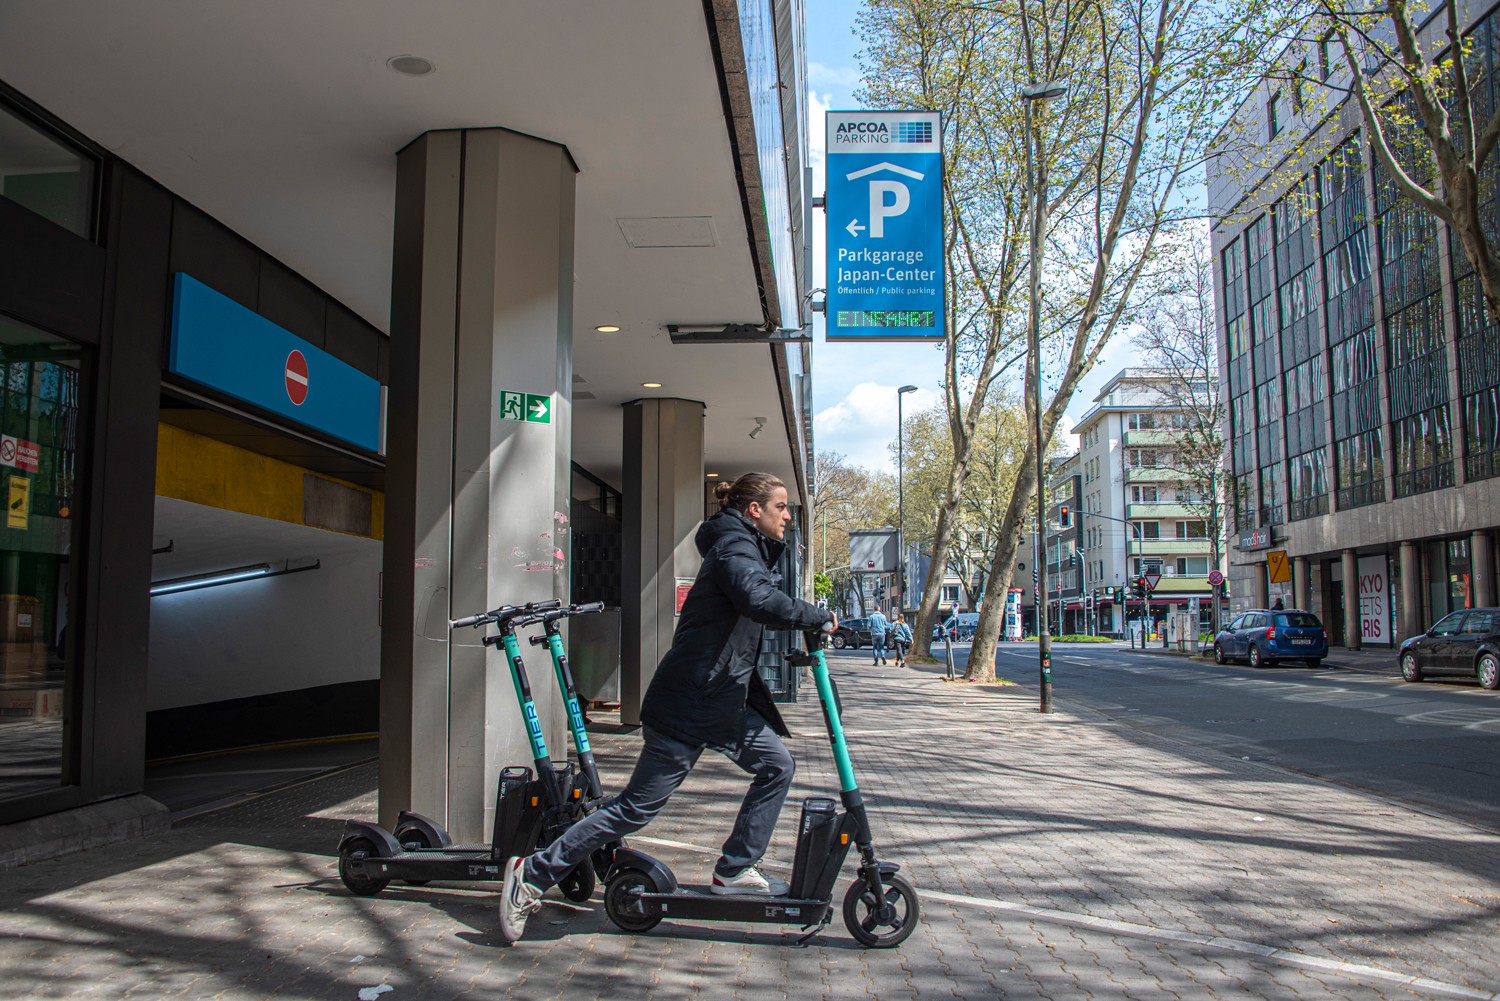 Micro-mobility company offers charging stations for e-scooters batteries in  car parks in Germany, Poland, Netherlands, UK, Sweden and Norway.